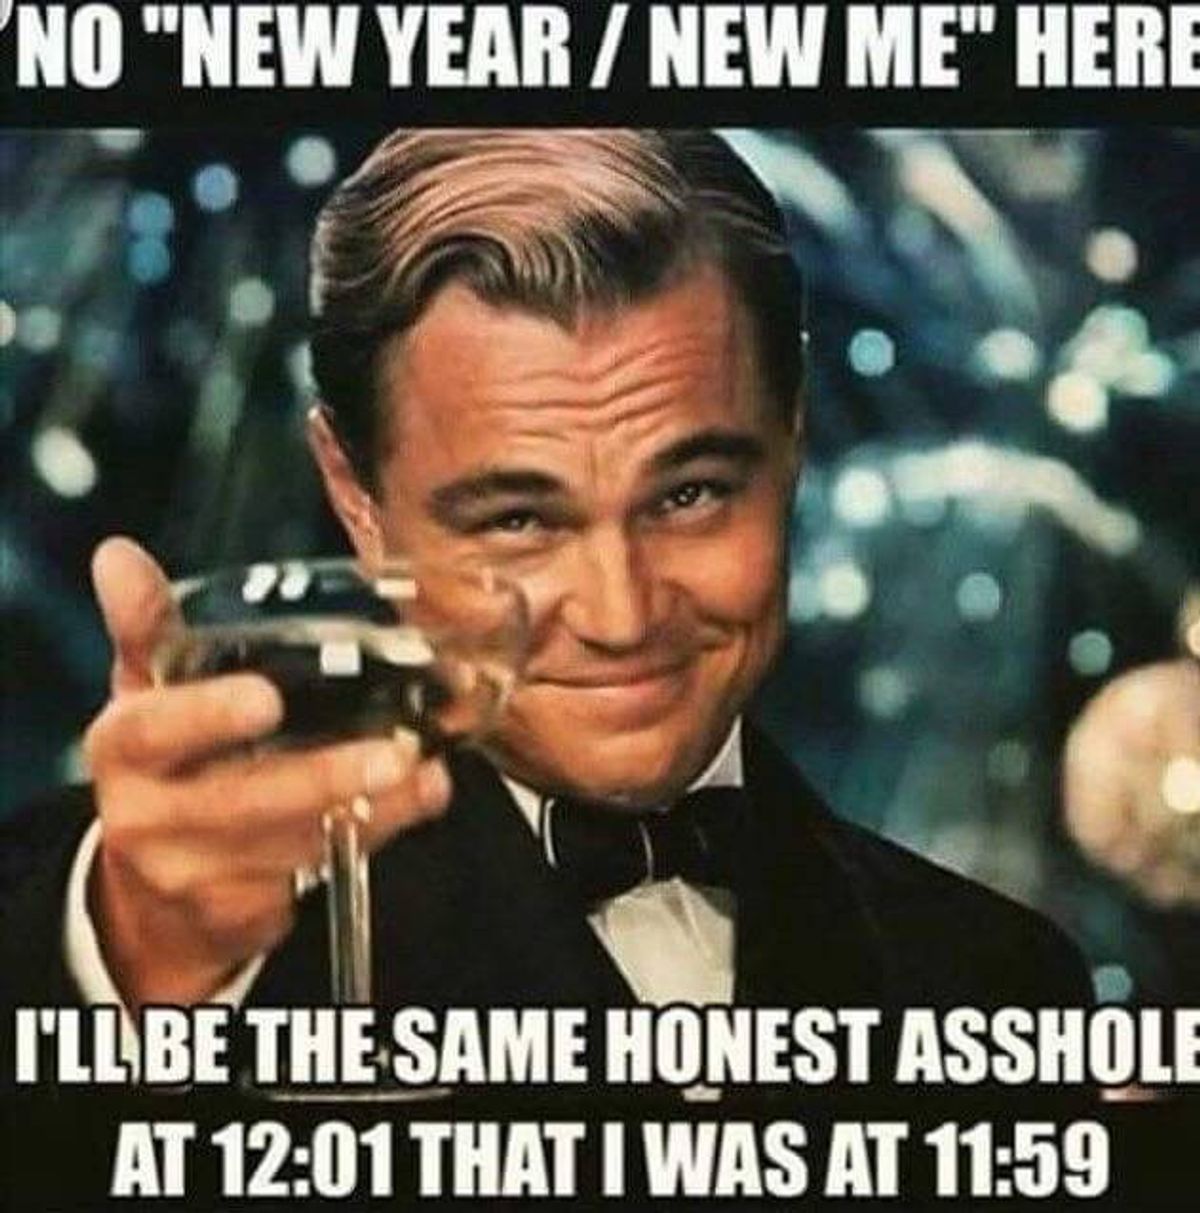 New Year, New You? I Don't Think So.